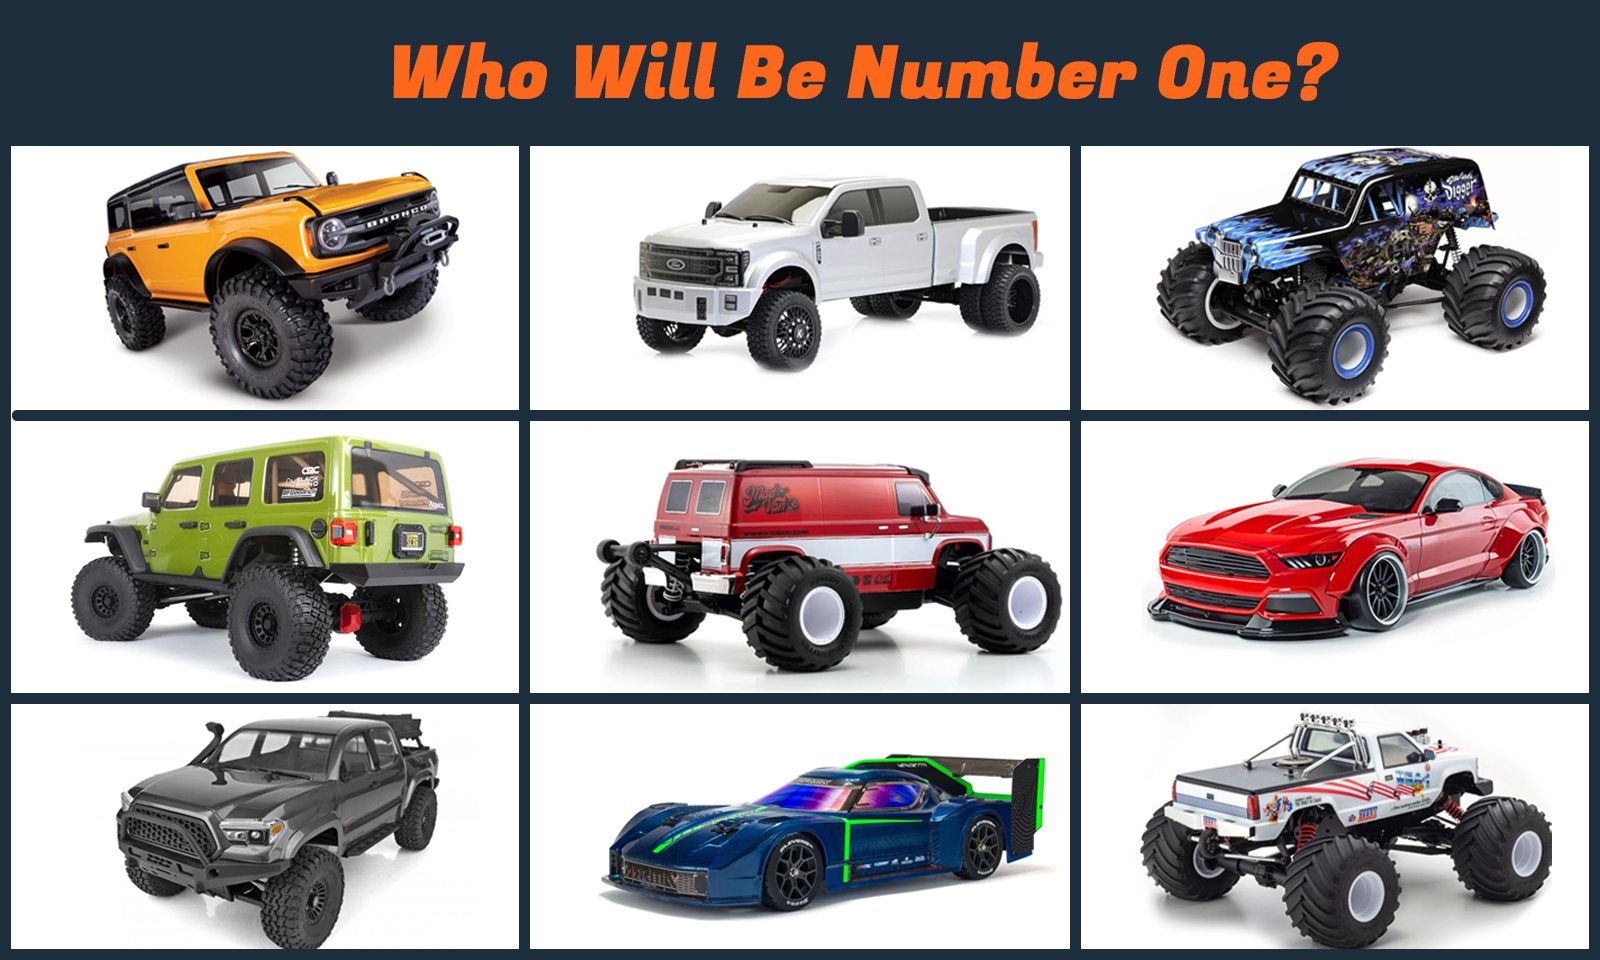 What were the top 10 RC Cars for 2021 - Best Sellers